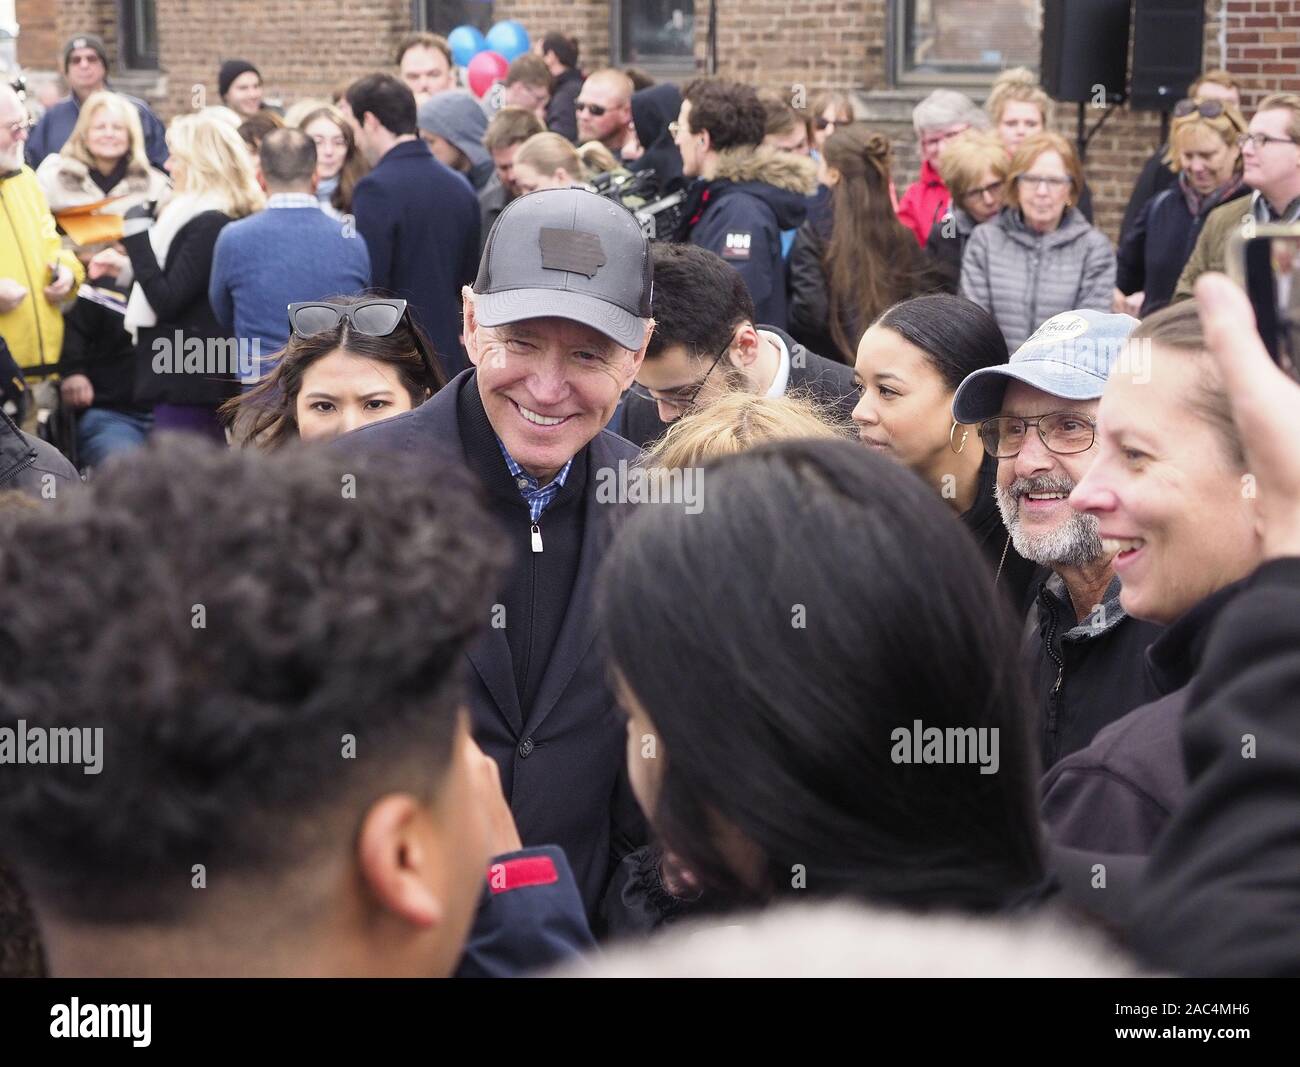 Council Bluffs, IOWA, USA. 30th Nov, 2019. Former vice-president and 2020 presidential Democratic candidate hopeful JOE BIDEN, center, meets supporters at the Biden campaign office in downtown Council Bluffs, Iowa, as he campaigns in western Iowa and begins his 18-stop ''No Marlarkey Bus Tour'' Saturday, Nov. 30, 2019. Credit: Jerry Mennenga/ZUMA Wire/Alamy Live News Stock Photo